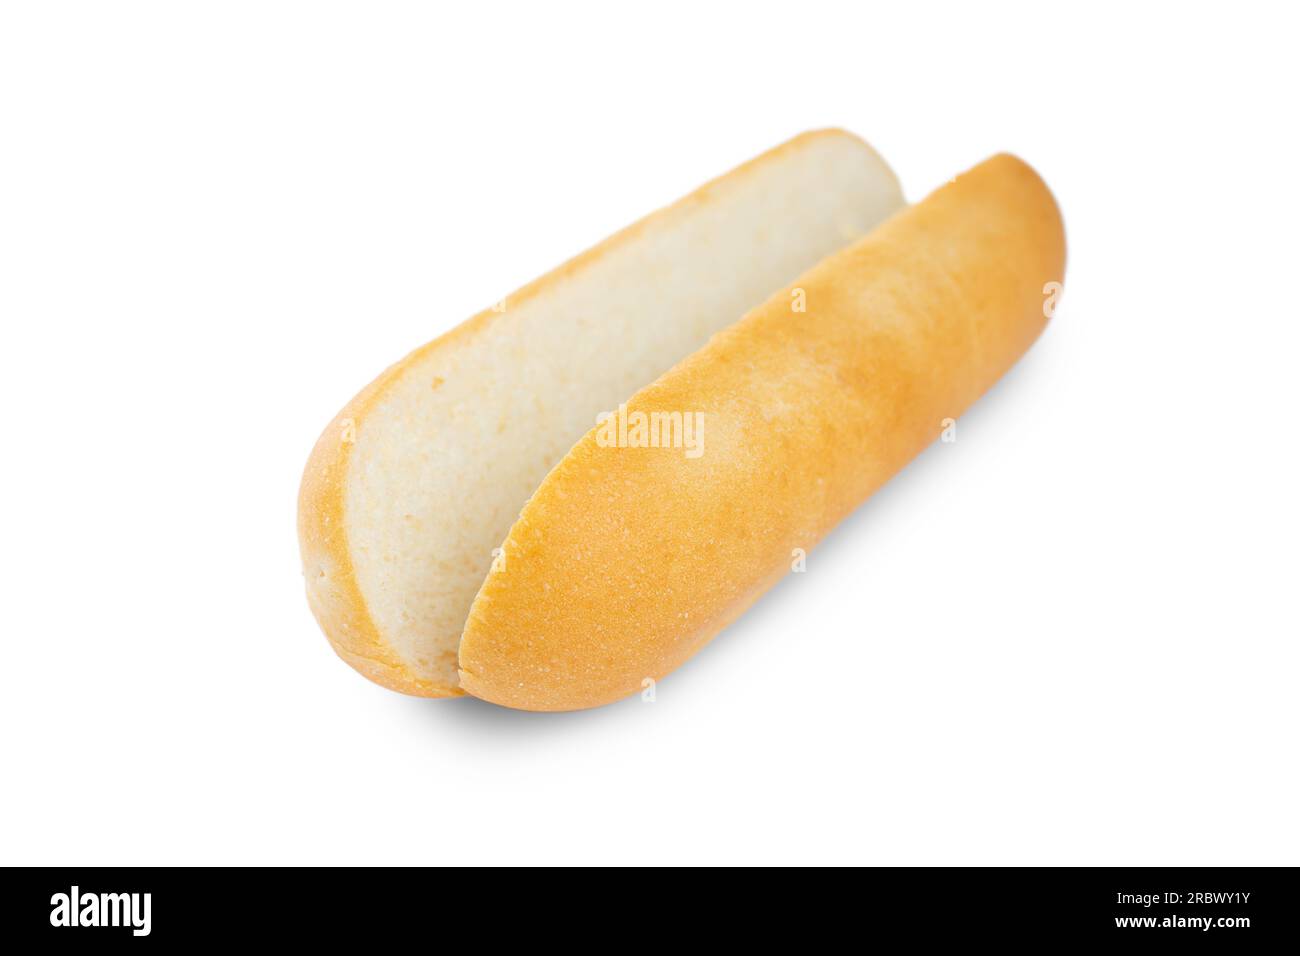 Hot dog cuted and opened wheat bun isolated on white background ...